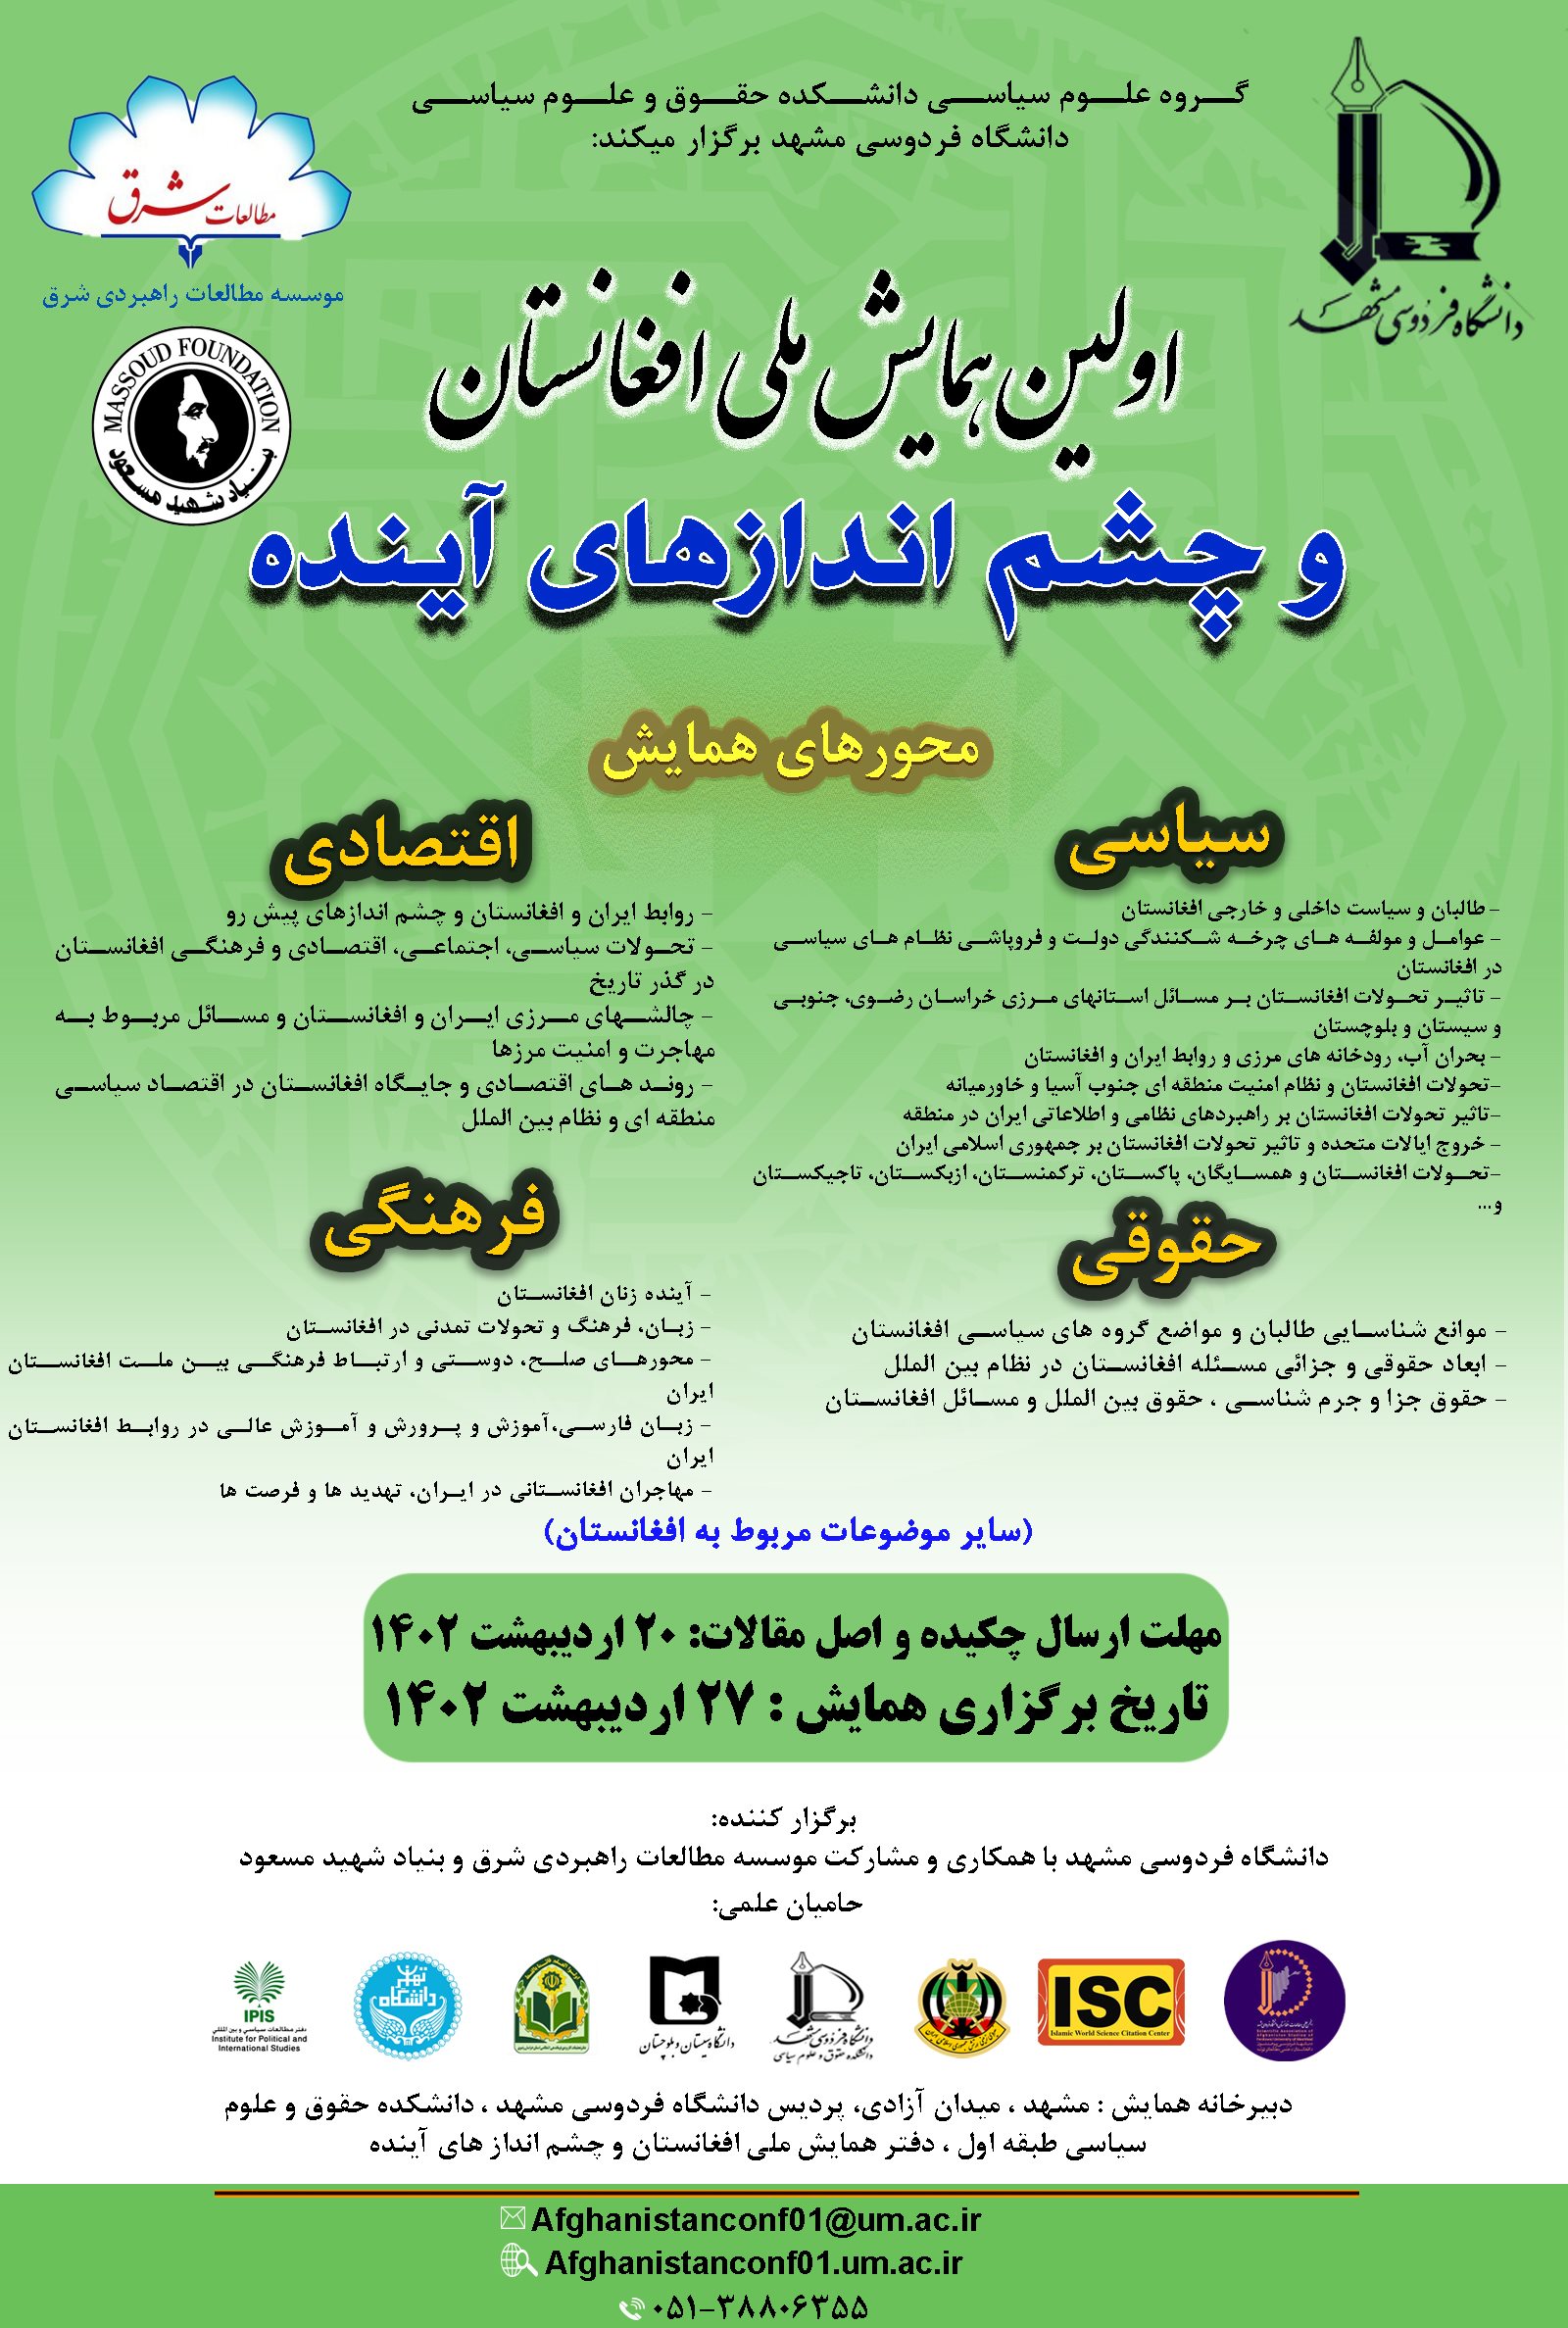 new poster Afghanistan conference